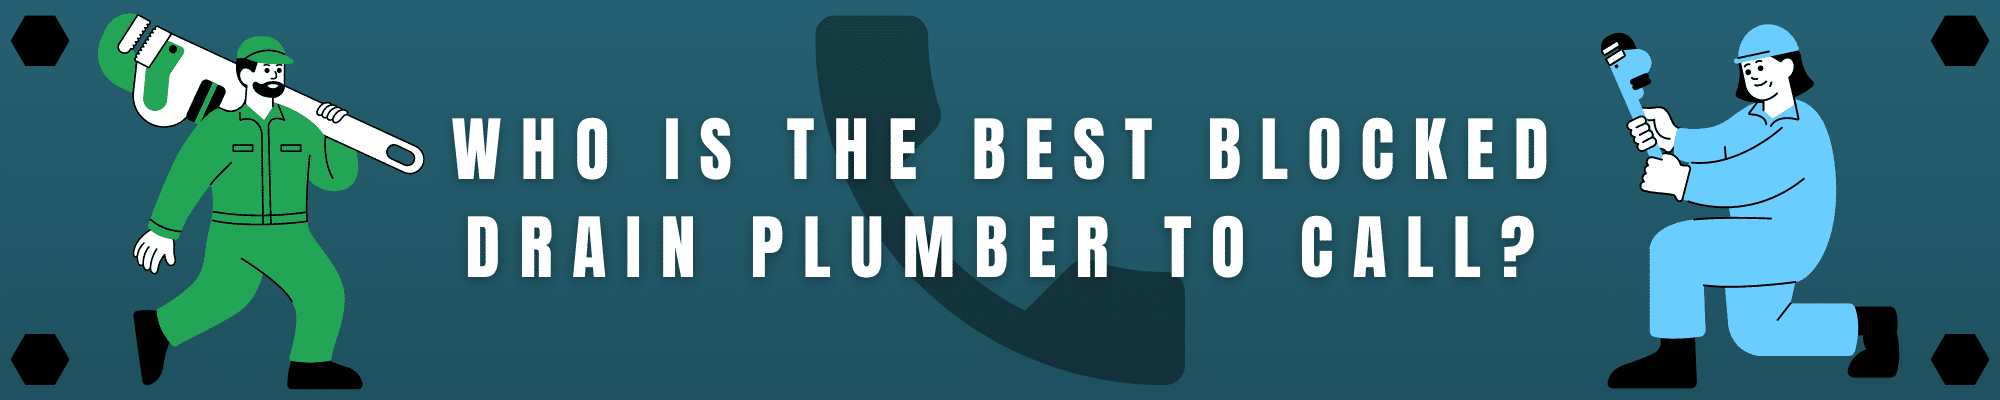 Who Is The Best Blocked Drain Plumber To Call